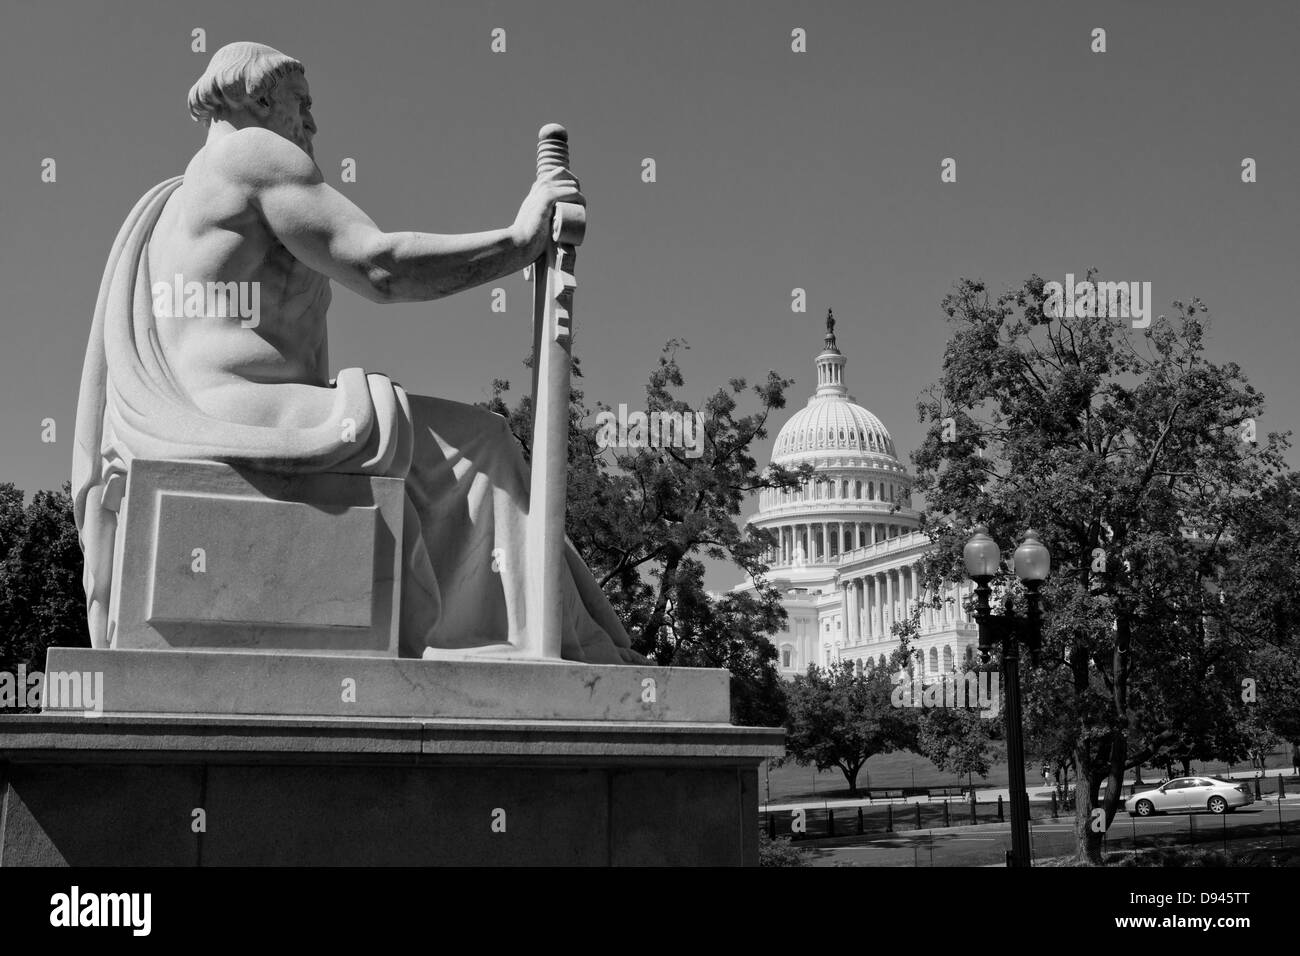 Majesty of Law sculpture at the Rayburn US House of Representatives building  - Washington, DC USA Stock Photo